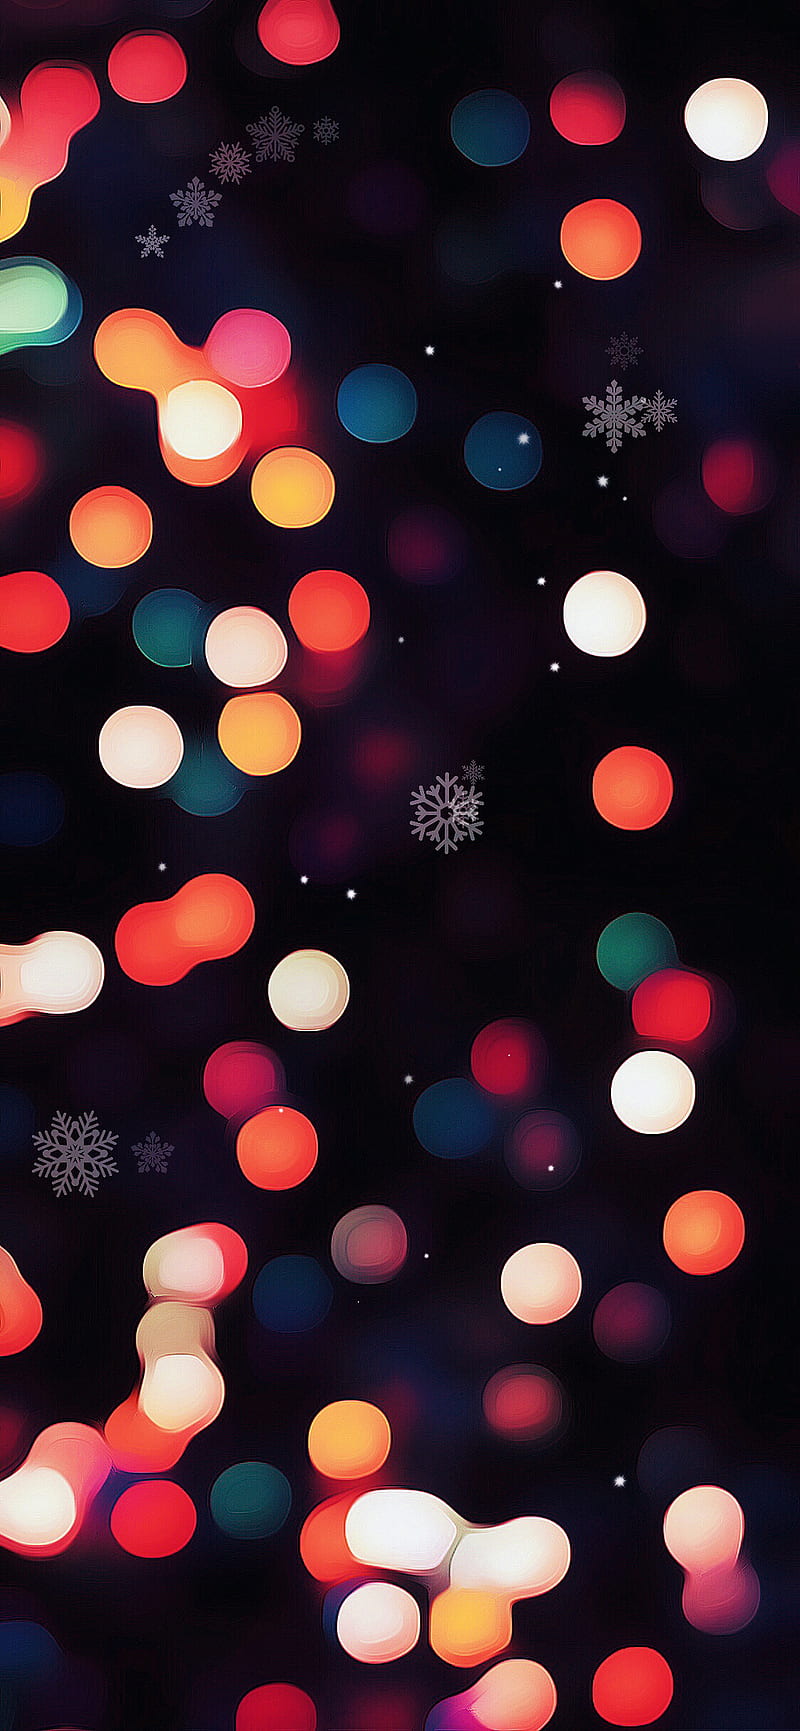 Amoled, black, new year, holidays, lights, snow, sparks, corazones, HD phone wallpaper